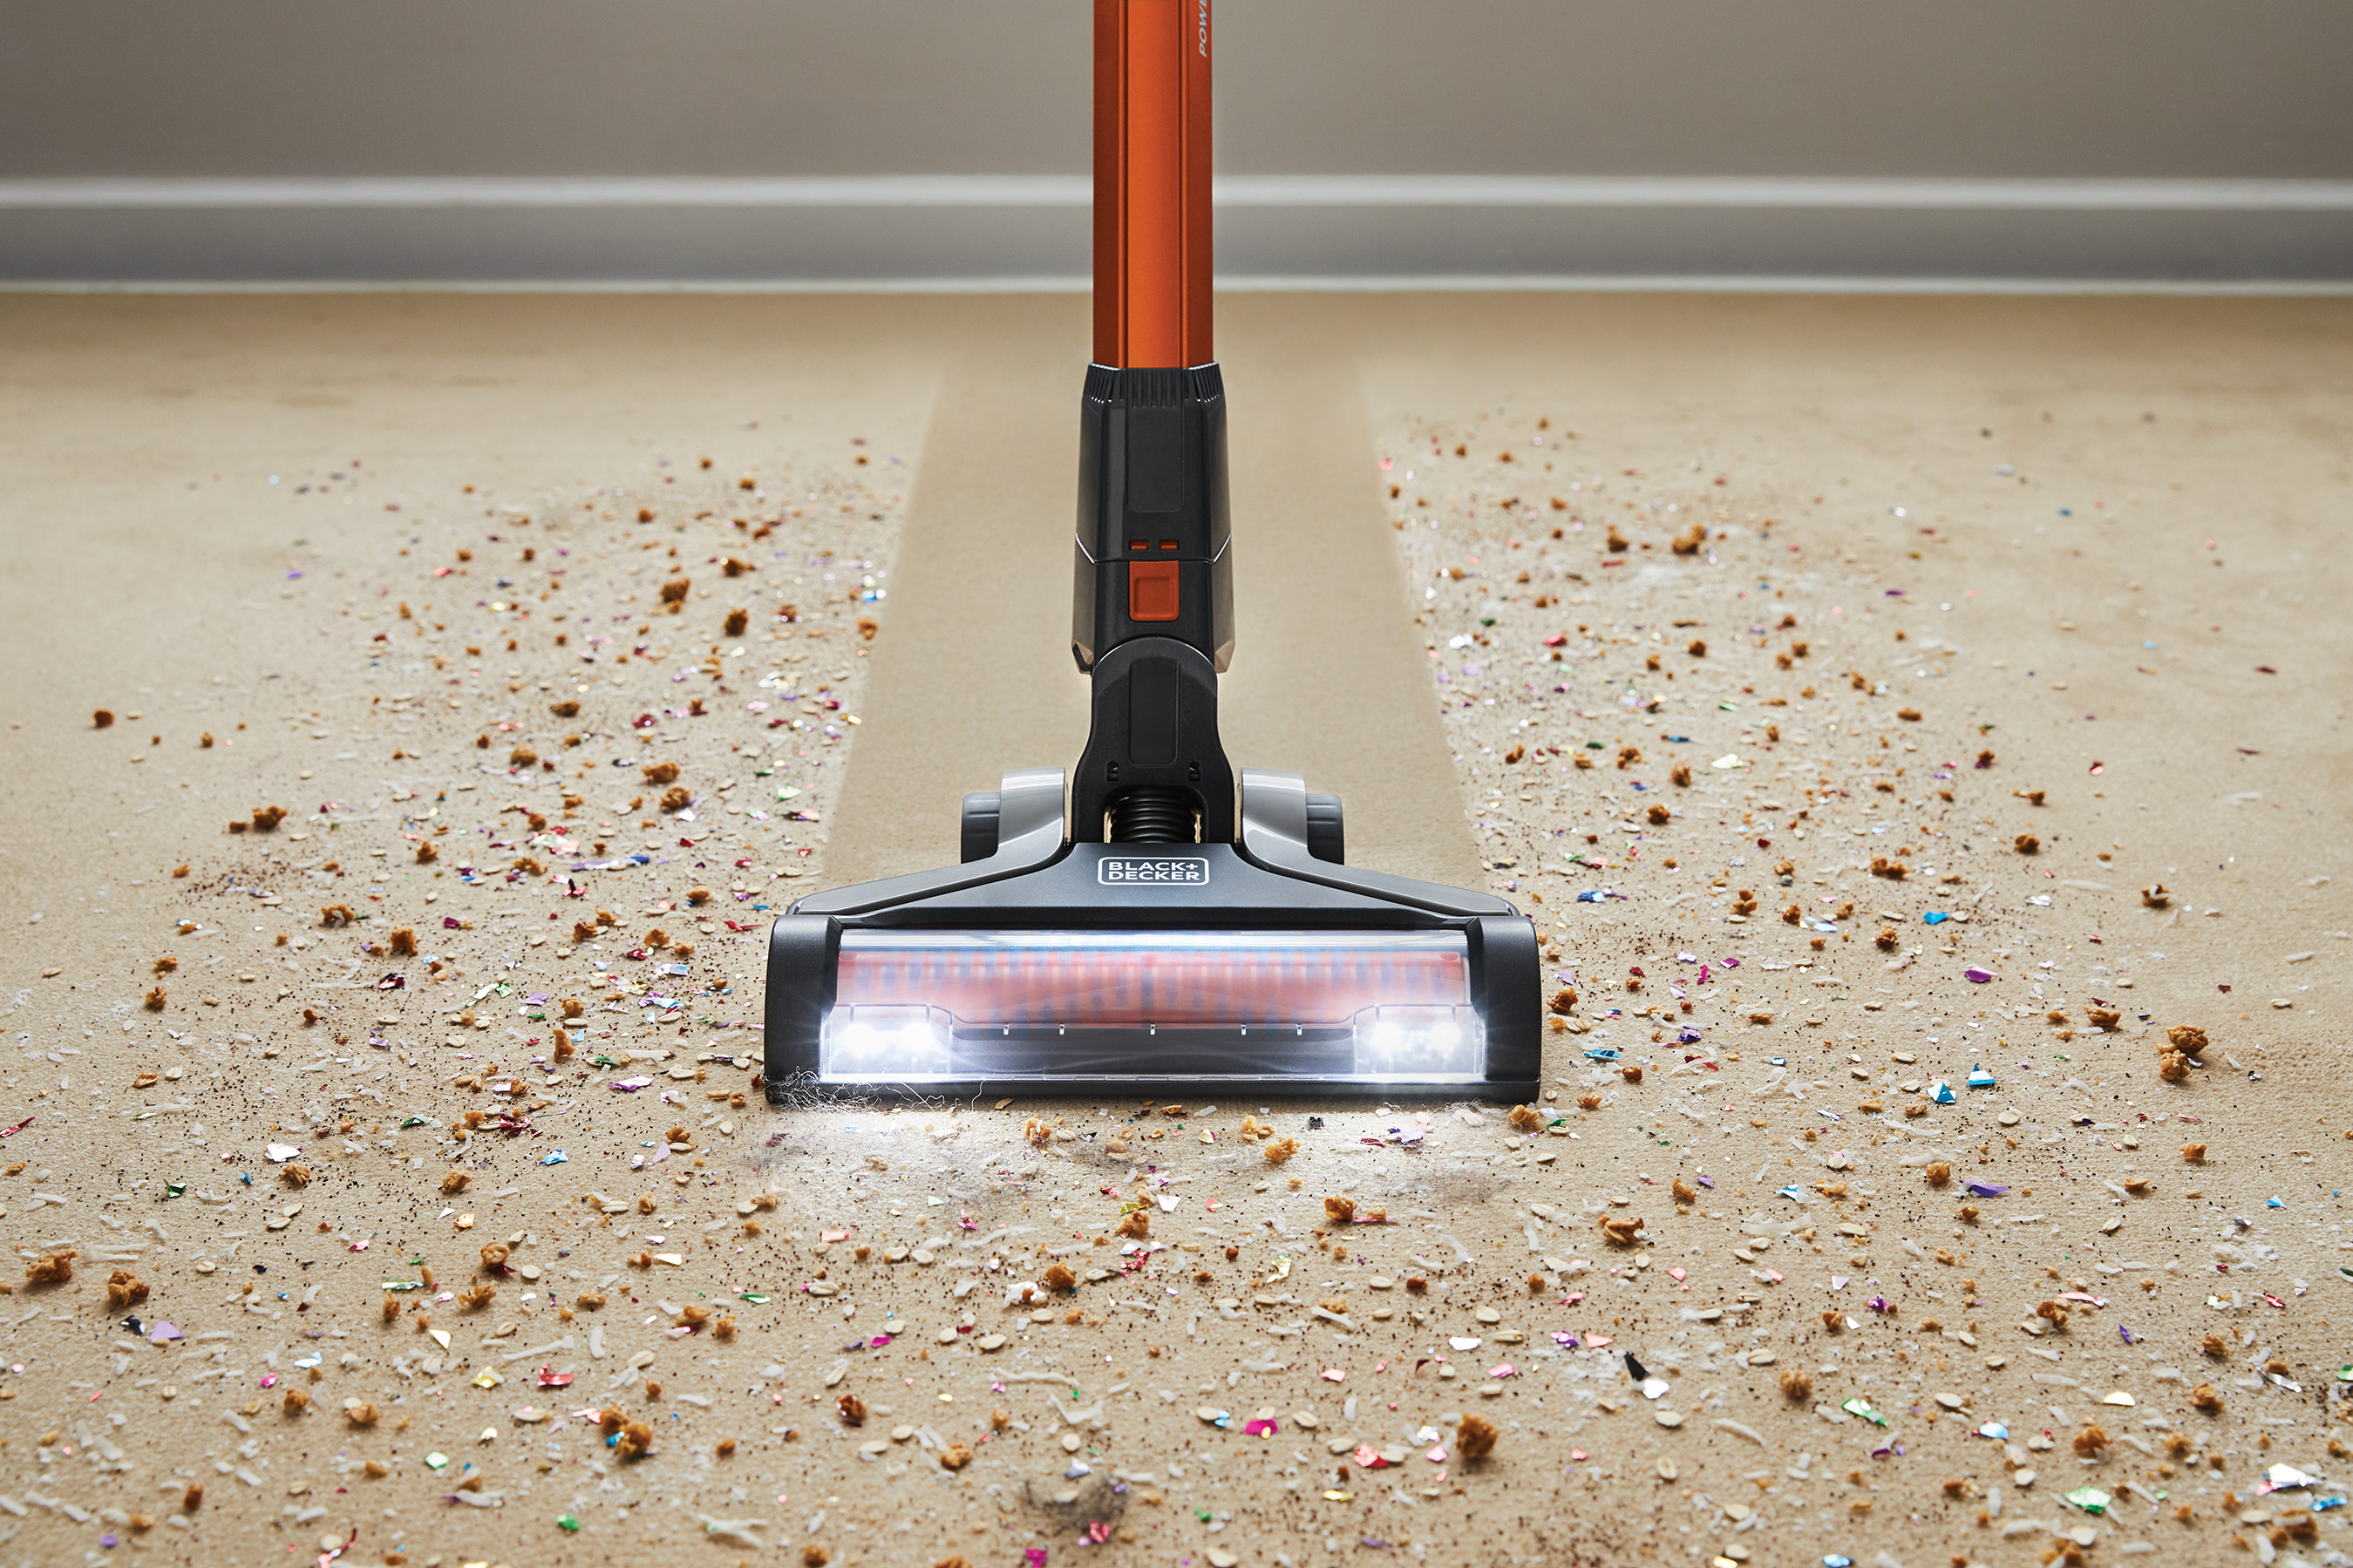 Floorhead Angle Designed For Multi-Surface Cleaning